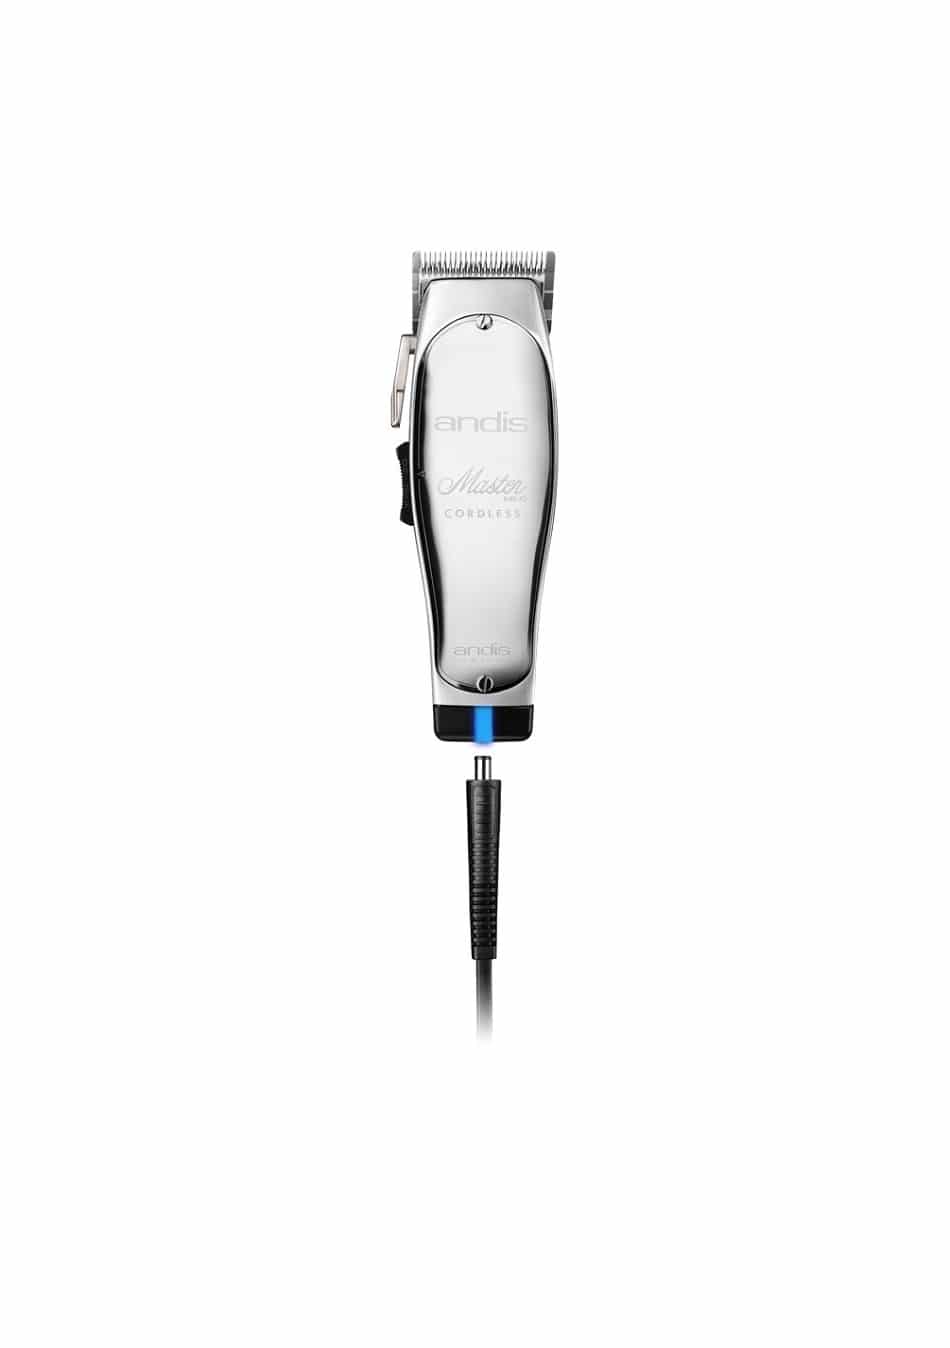 andis master cordless clipper review